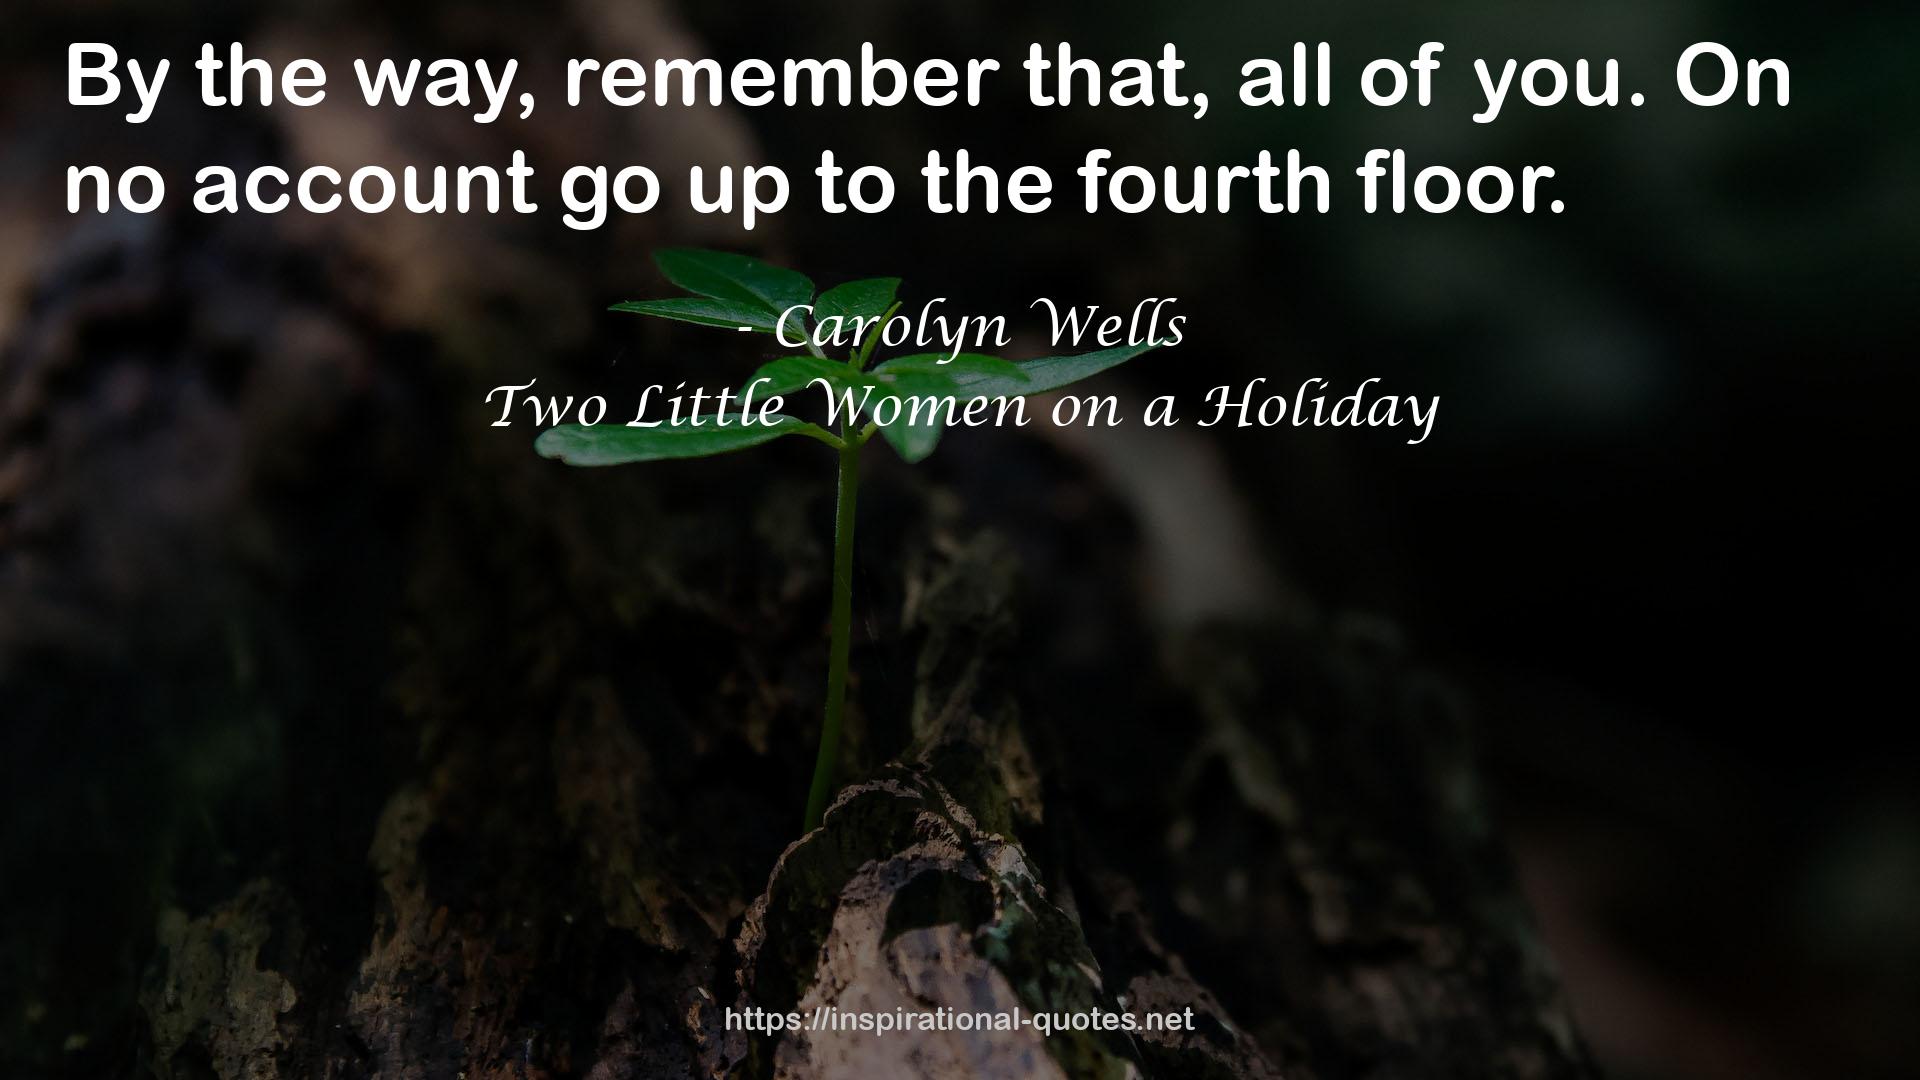 Two Little Women on a Holiday QUOTES